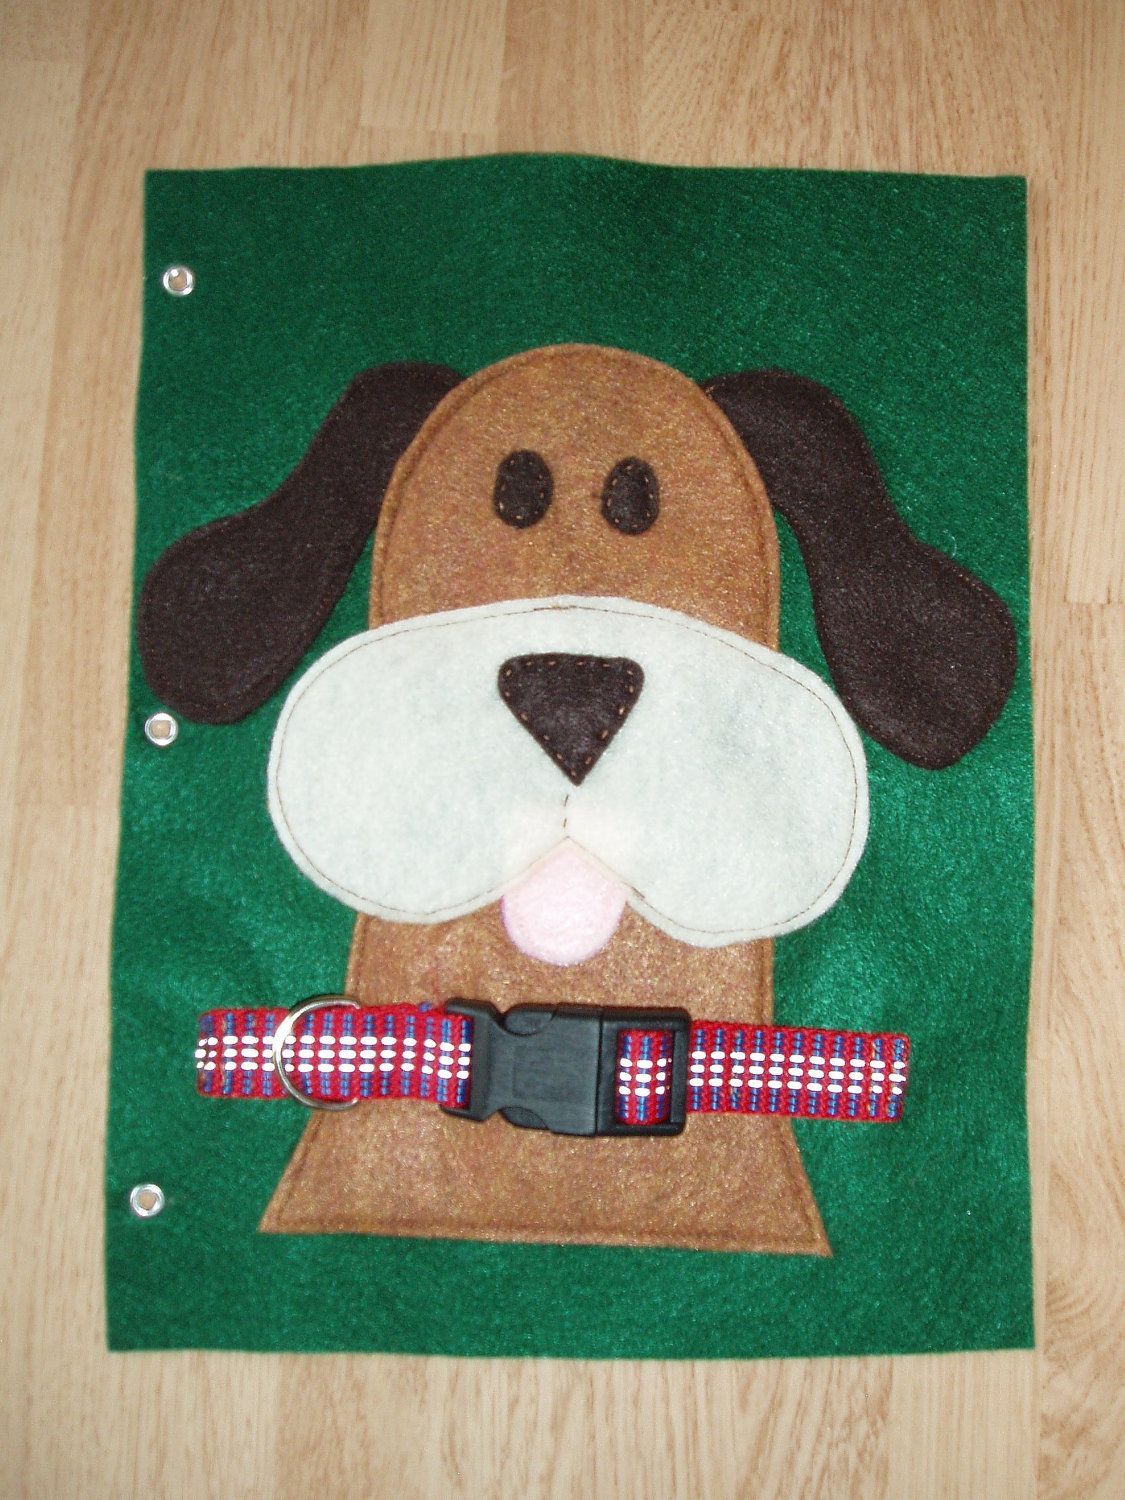 Buckle the Dog Collar Green Felt Quiet Book Page by pagebypage2, $6.50